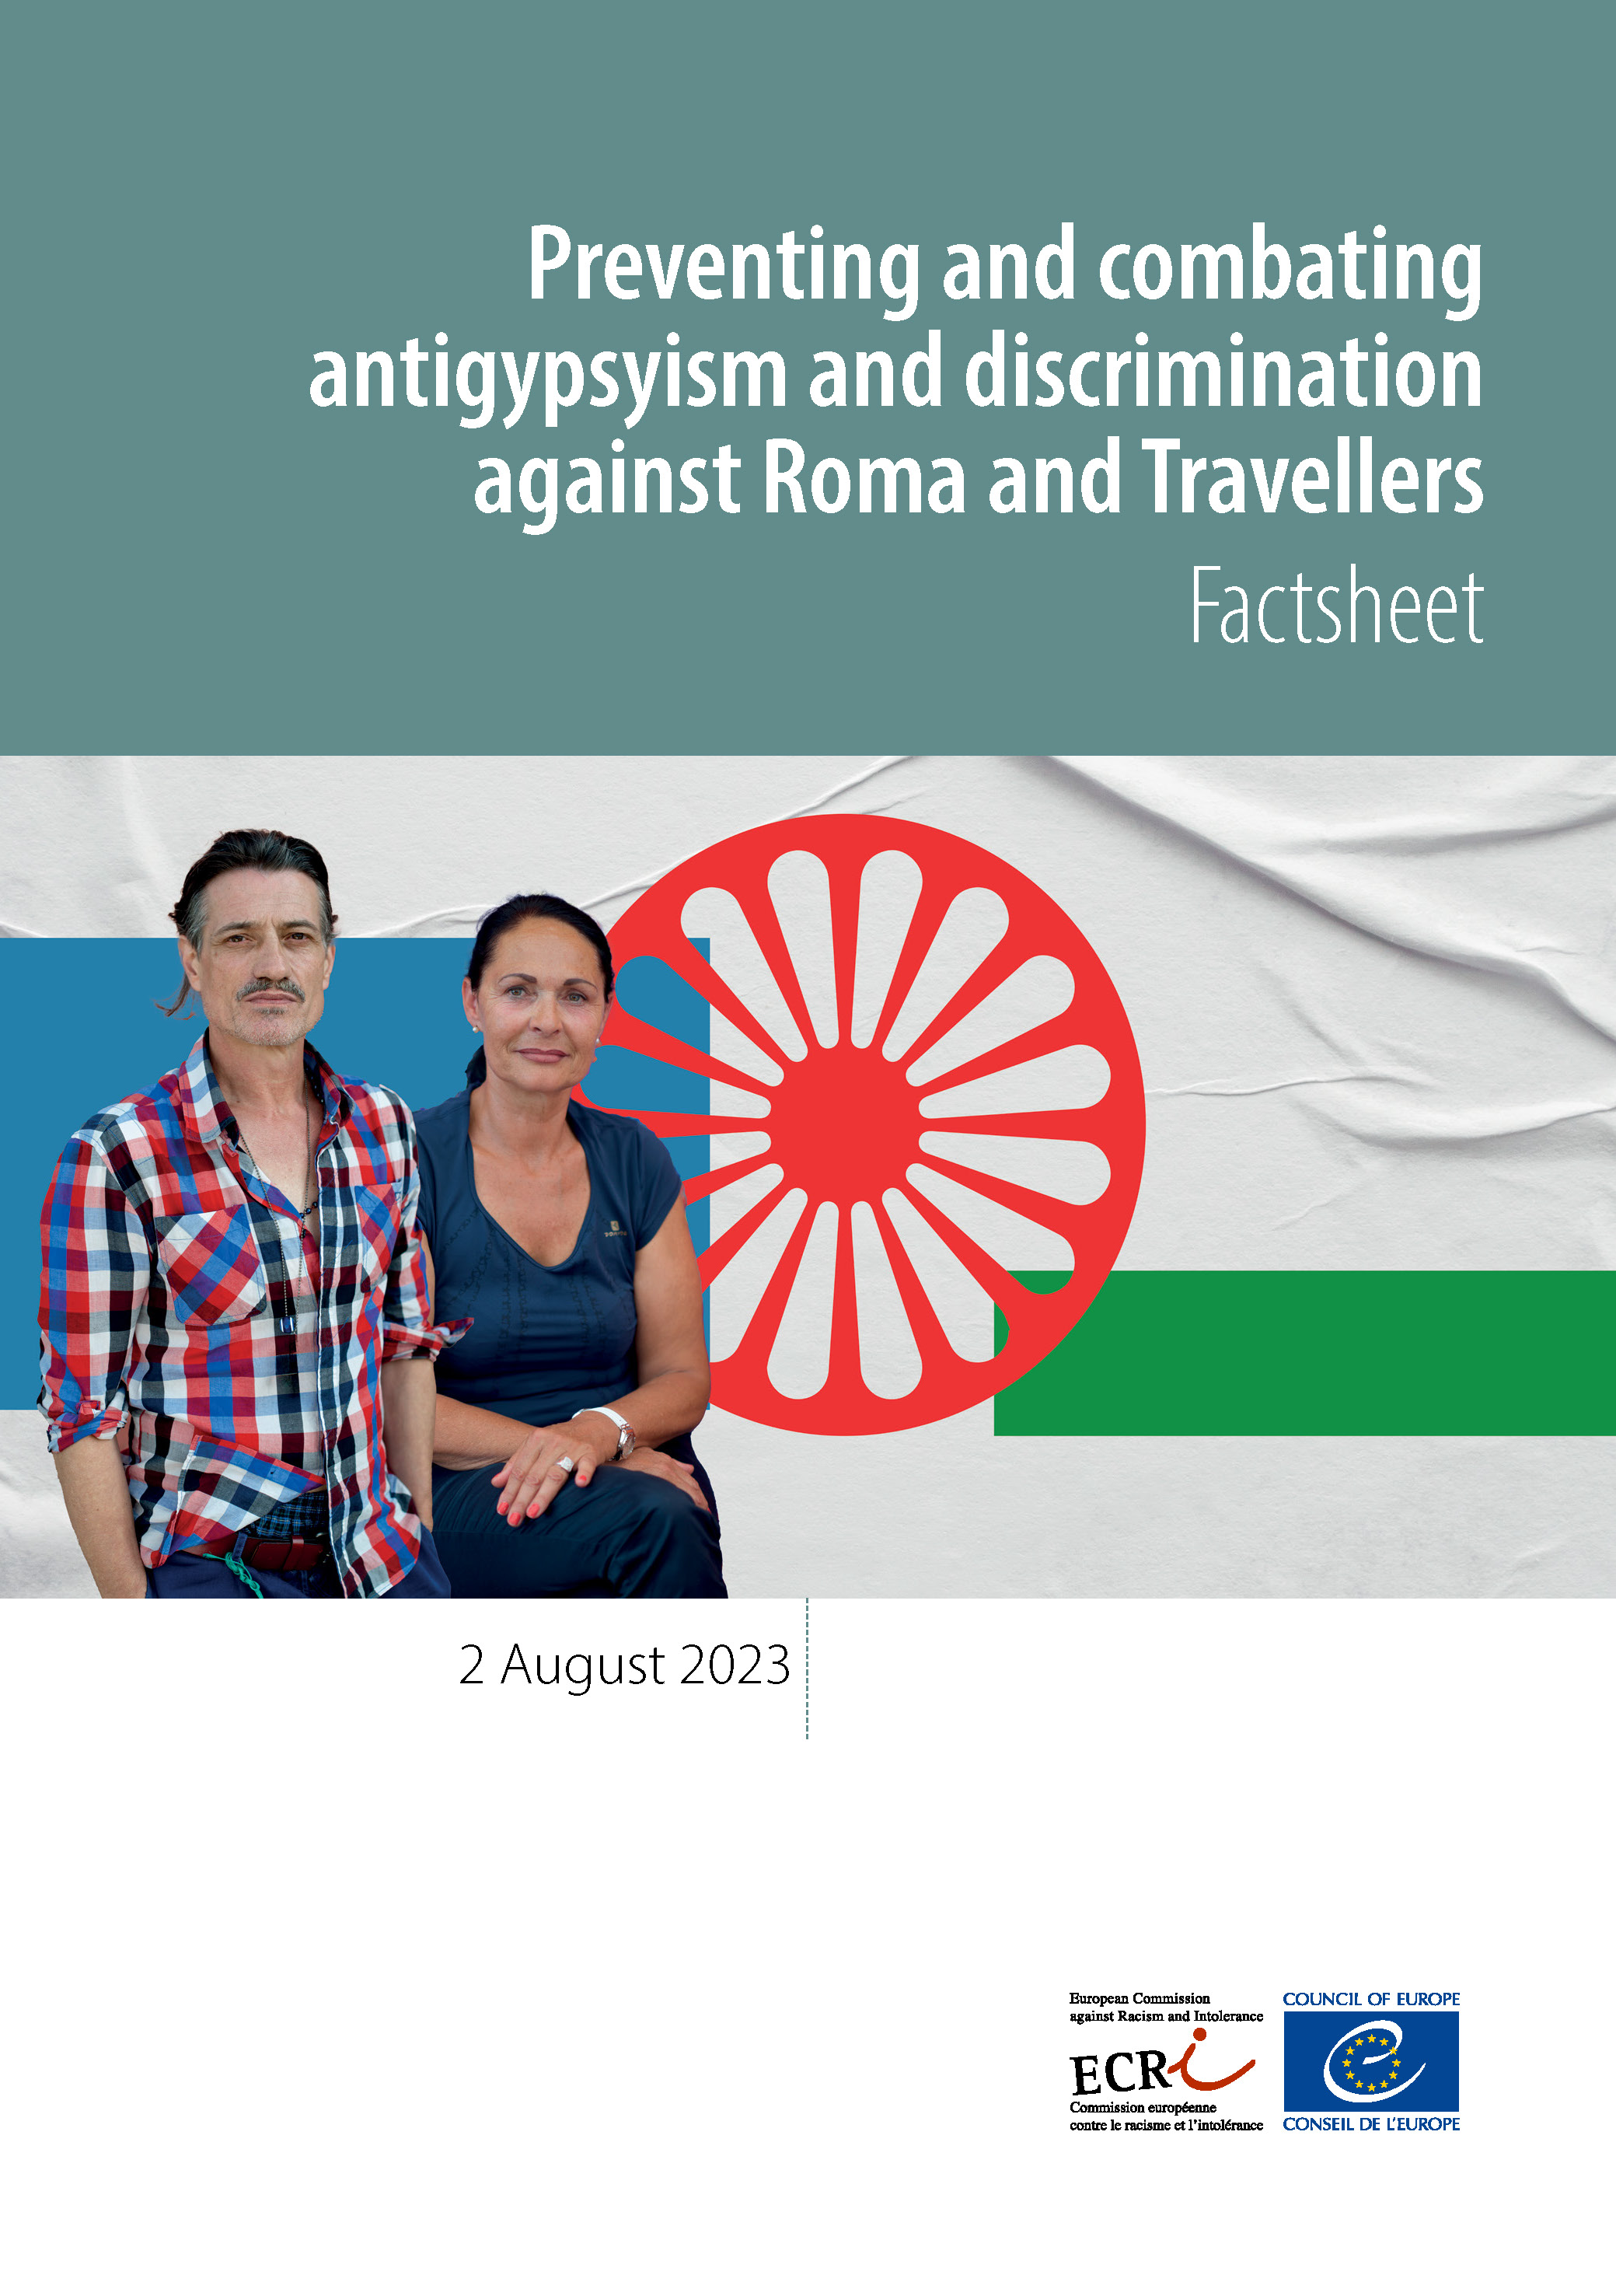 Preventing and combating antigypsyism and discrimination against Roma and Travellers